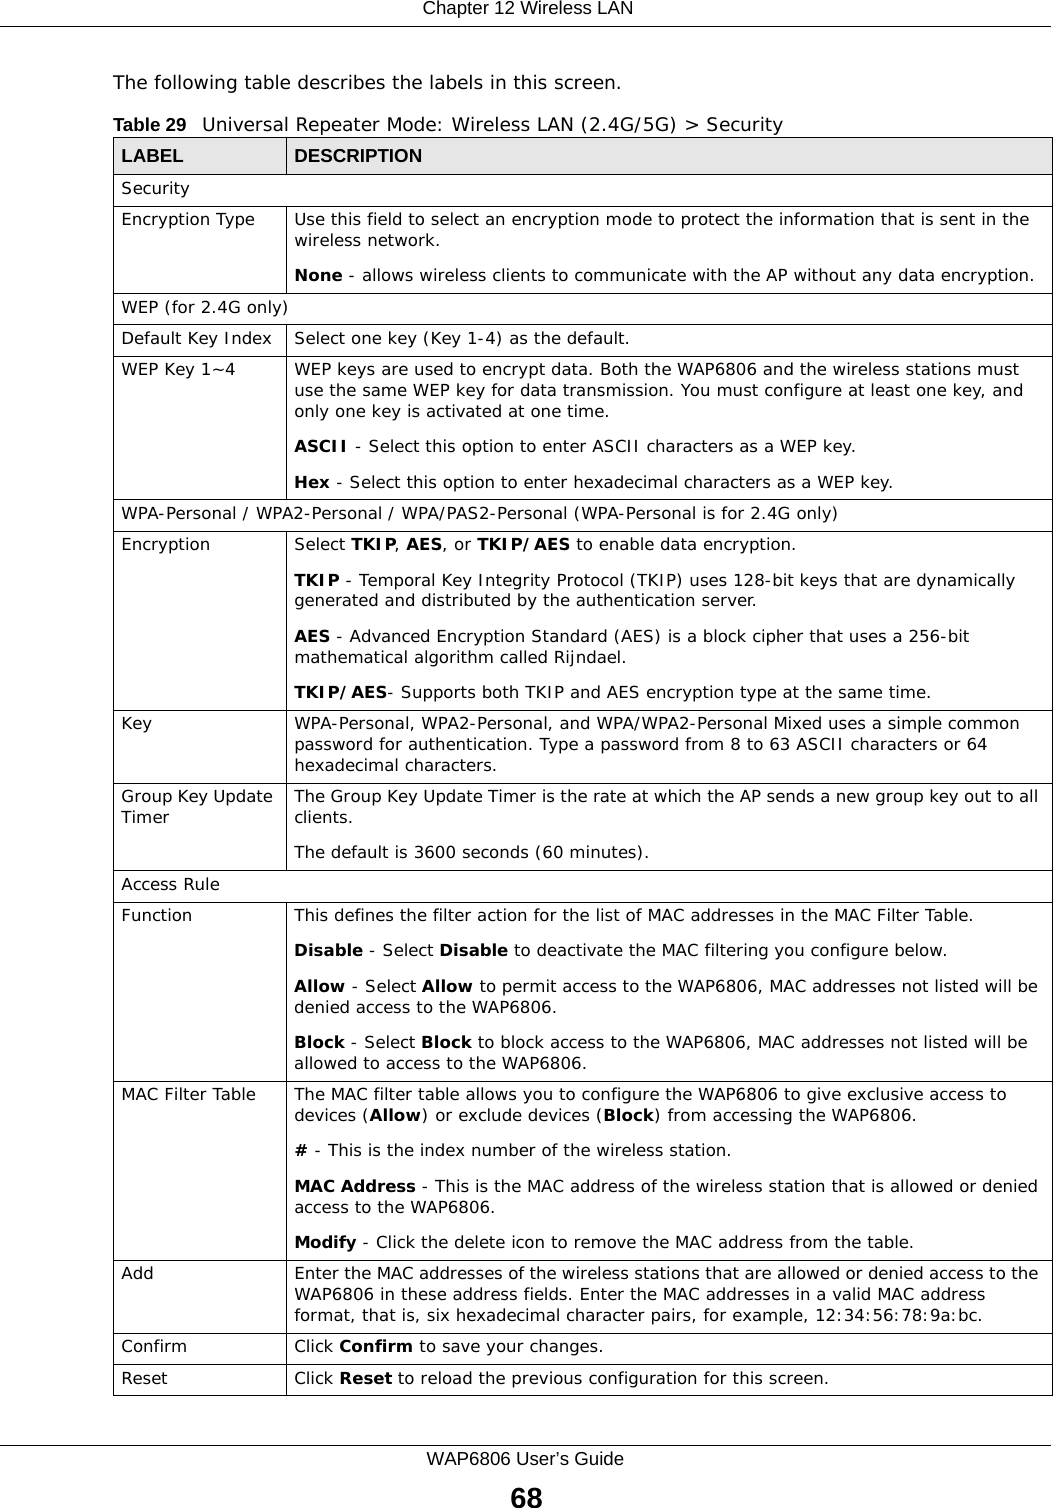  Chapter 12 Wireless LANWAP6806 User’s Guide68The following table describes the labels in this screen. Table 29   Universal Repeater Mode: Wireless LAN (2.4G/5G) &gt; SecurityLABEL  DESCRIPTIONSecurityEncryption Type Use this field to select an encryption mode to protect the information that is sent in the wireless network.None - allows wireless clients to communicate with the AP without any data encryption.WEP (for 2.4G only)Default Key Index Select one key (Key 1-4) as the default.WEP Key 1~4 WEP keys are used to encrypt data. Both the WAP6806 and the wireless stations must use the same WEP key for data transmission. You must configure at least one key, and only one key is activated at one time.ASCII - Select this option to enter ASCII characters as a WEP key.Hex - Select this option to enter hexadecimal characters as a WEP key.WPA-Personal / WPA2-Personal / WPA/PAS2-Personal (WPA-Personal is for 2.4G only)Encryption Select TKIP, AES, or TKIP/AES to enable data encryption.TKIP - Temporal Key Integrity Protocol (TKIP) uses 128-bit keys that are dynamically generated and distributed by the authentication server.AES - Advanced Encryption Standard (AES) is a block cipher that uses a 256-bit mathematical algorithm called Rijndael.TKIP/AES- Supports both TKIP and AES encryption type at the same time.Key WPA-Personal, WPA2-Personal, and WPA/WPA2-Personal Mixed uses a simple common password for authentication. Type a password from 8 to 63 ASCII characters or 64 hexadecimal characters.Group Key Update Timer The Group Key Update Timer is the rate at which the AP sends a new group key out to all clients.The default is 3600 seconds (60 minutes).Access RuleFunction This defines the filter action for the list of MAC addresses in the MAC Filter Table.Disable - Select Disable to deactivate the MAC filtering you configure below.Allow - Select Allow to permit access to the WAP6806, MAC addresses not listed will be denied access to the WAP6806.Block - Select Block to block access to the WAP6806, MAC addresses not listed will be allowed to access to the WAP6806.MAC Filter Table The MAC filter table allows you to configure the WAP6806 to give exclusive access to devices (Allow) or exclude devices (Block) from accessing the WAP6806.# - This is the index number of the wireless station.MAC Address - This is the MAC address of the wireless station that is allowed or denied access to the WAP6806.Modify - Click the delete icon to remove the MAC address from the table.Add Enter the MAC addresses of the wireless stations that are allowed or denied access to the WAP6806 in these address fields. Enter the MAC addresses in a valid MAC address format, that is, six hexadecimal character pairs, for example, 12:34:56:78:9a:bc.Confirm Click Confirm to save your changes.Reset Click Reset to reload the previous configuration for this screen.